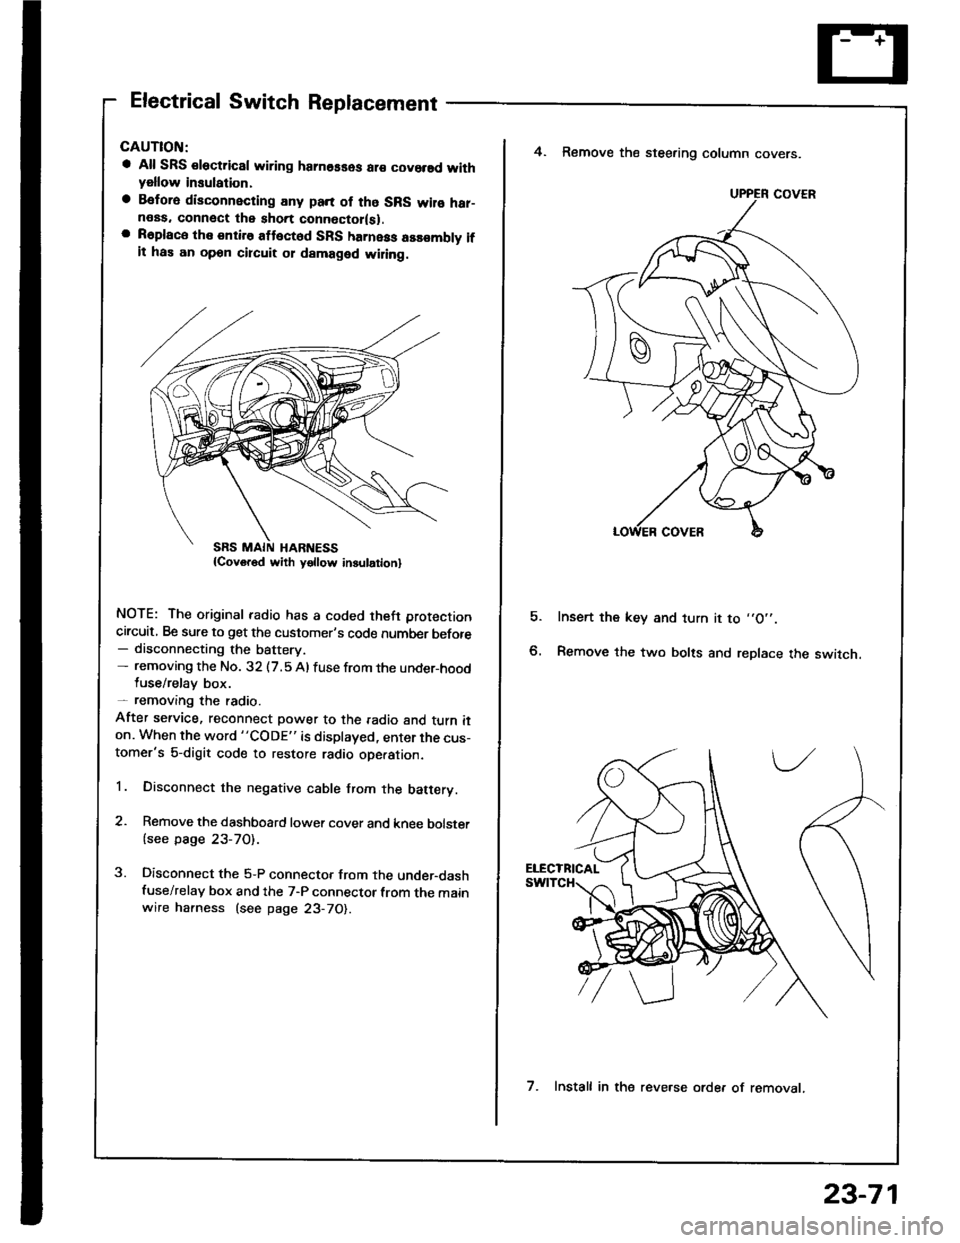 HONDA INTEGRA 1994 4.G Workshop Manual Electrical Switch Replacement
a All SRS €lectric8l wiring hamosses ar€ covorsd withyellow insulation,
a Befora disconnecting any pan of tho SRS wilo har-neas. connect the short connoctor(sl.a R6pl